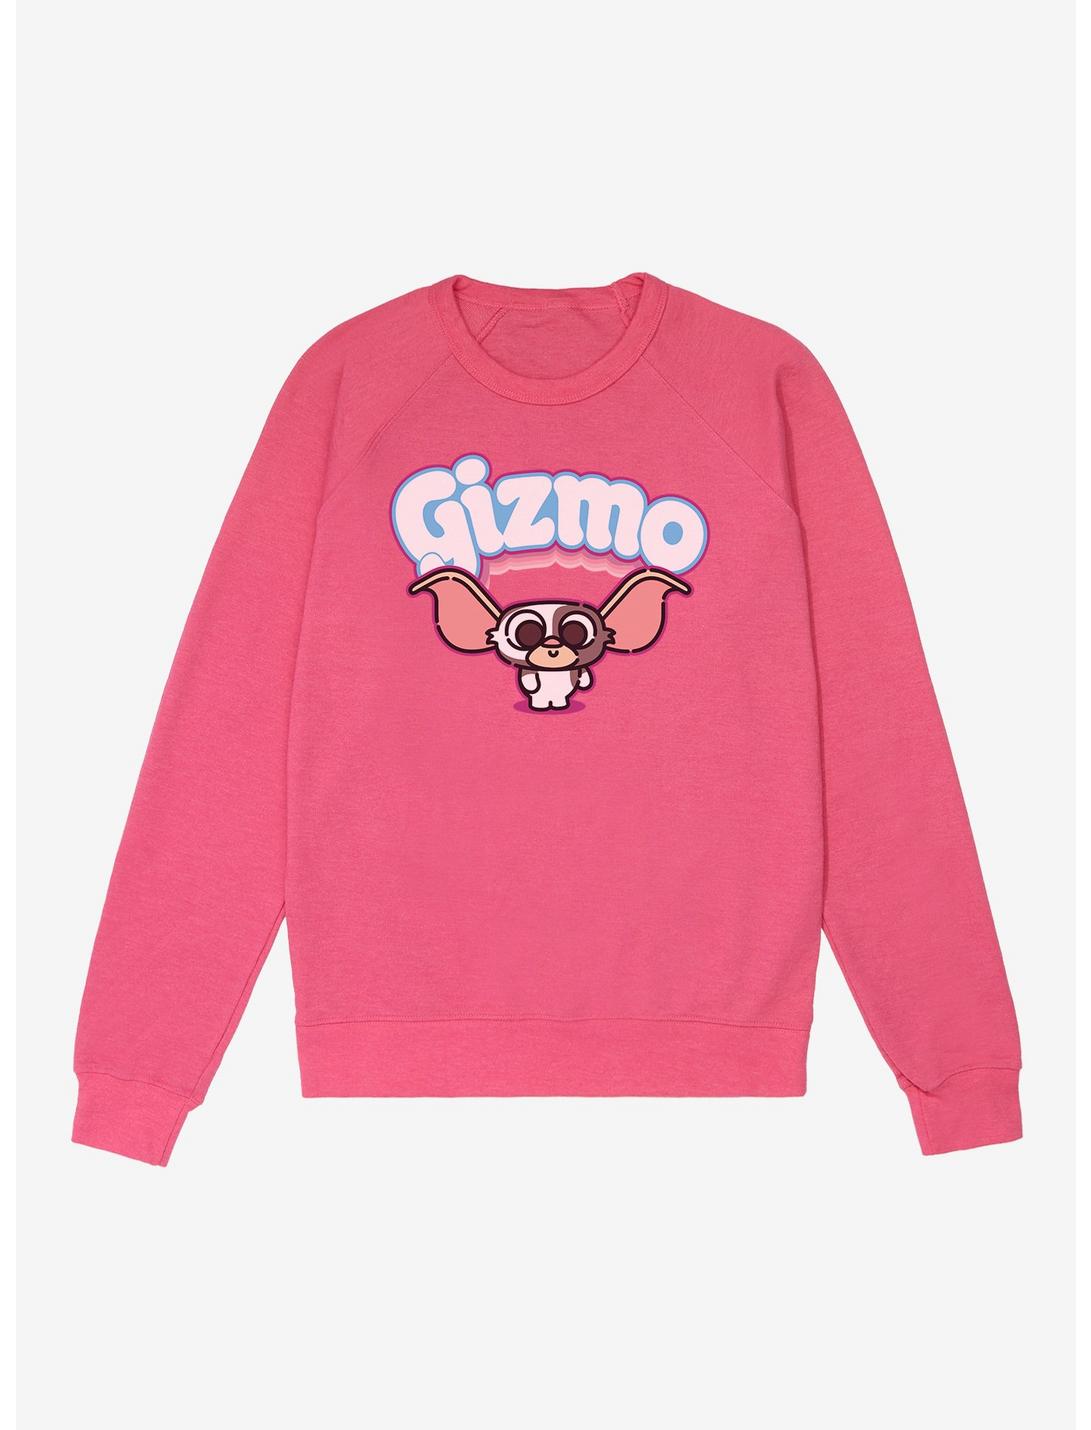 Gremlins Chibi Gizmo French Terry Sweatshirt, HELICONIA HEATHER, hi-res